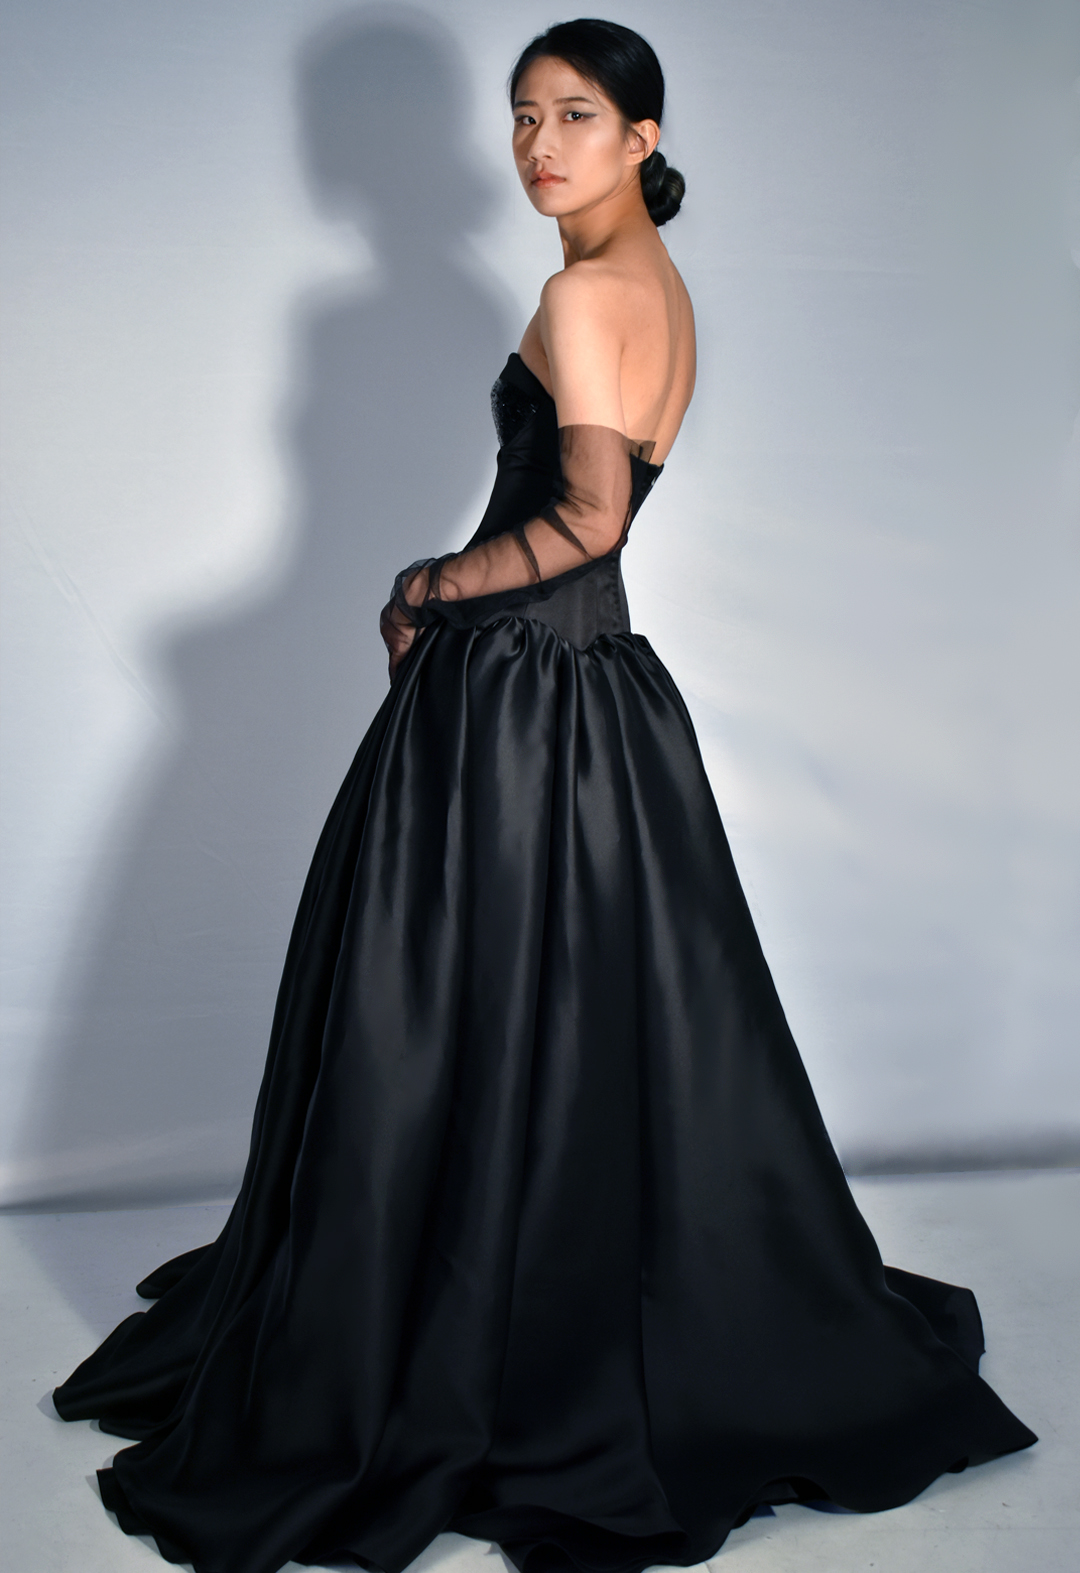 This black gown is made from 100 percent silk. The photo shows a three-quarter side view of a woman wearing a black silk gown with beading covering three-quarters of the bodice cups. The floor-length gown has a drop-waist duchesse satin bodice with cone-like satin-faced organza skirt panels gathered along the drop-waist, pooling onto the floor. The model is wearing black tulle gloves that cover three-quarters of her arms. Her face is facing the viewer. Her left arm rests along her hip, with her right hand in front of her. The background is white.